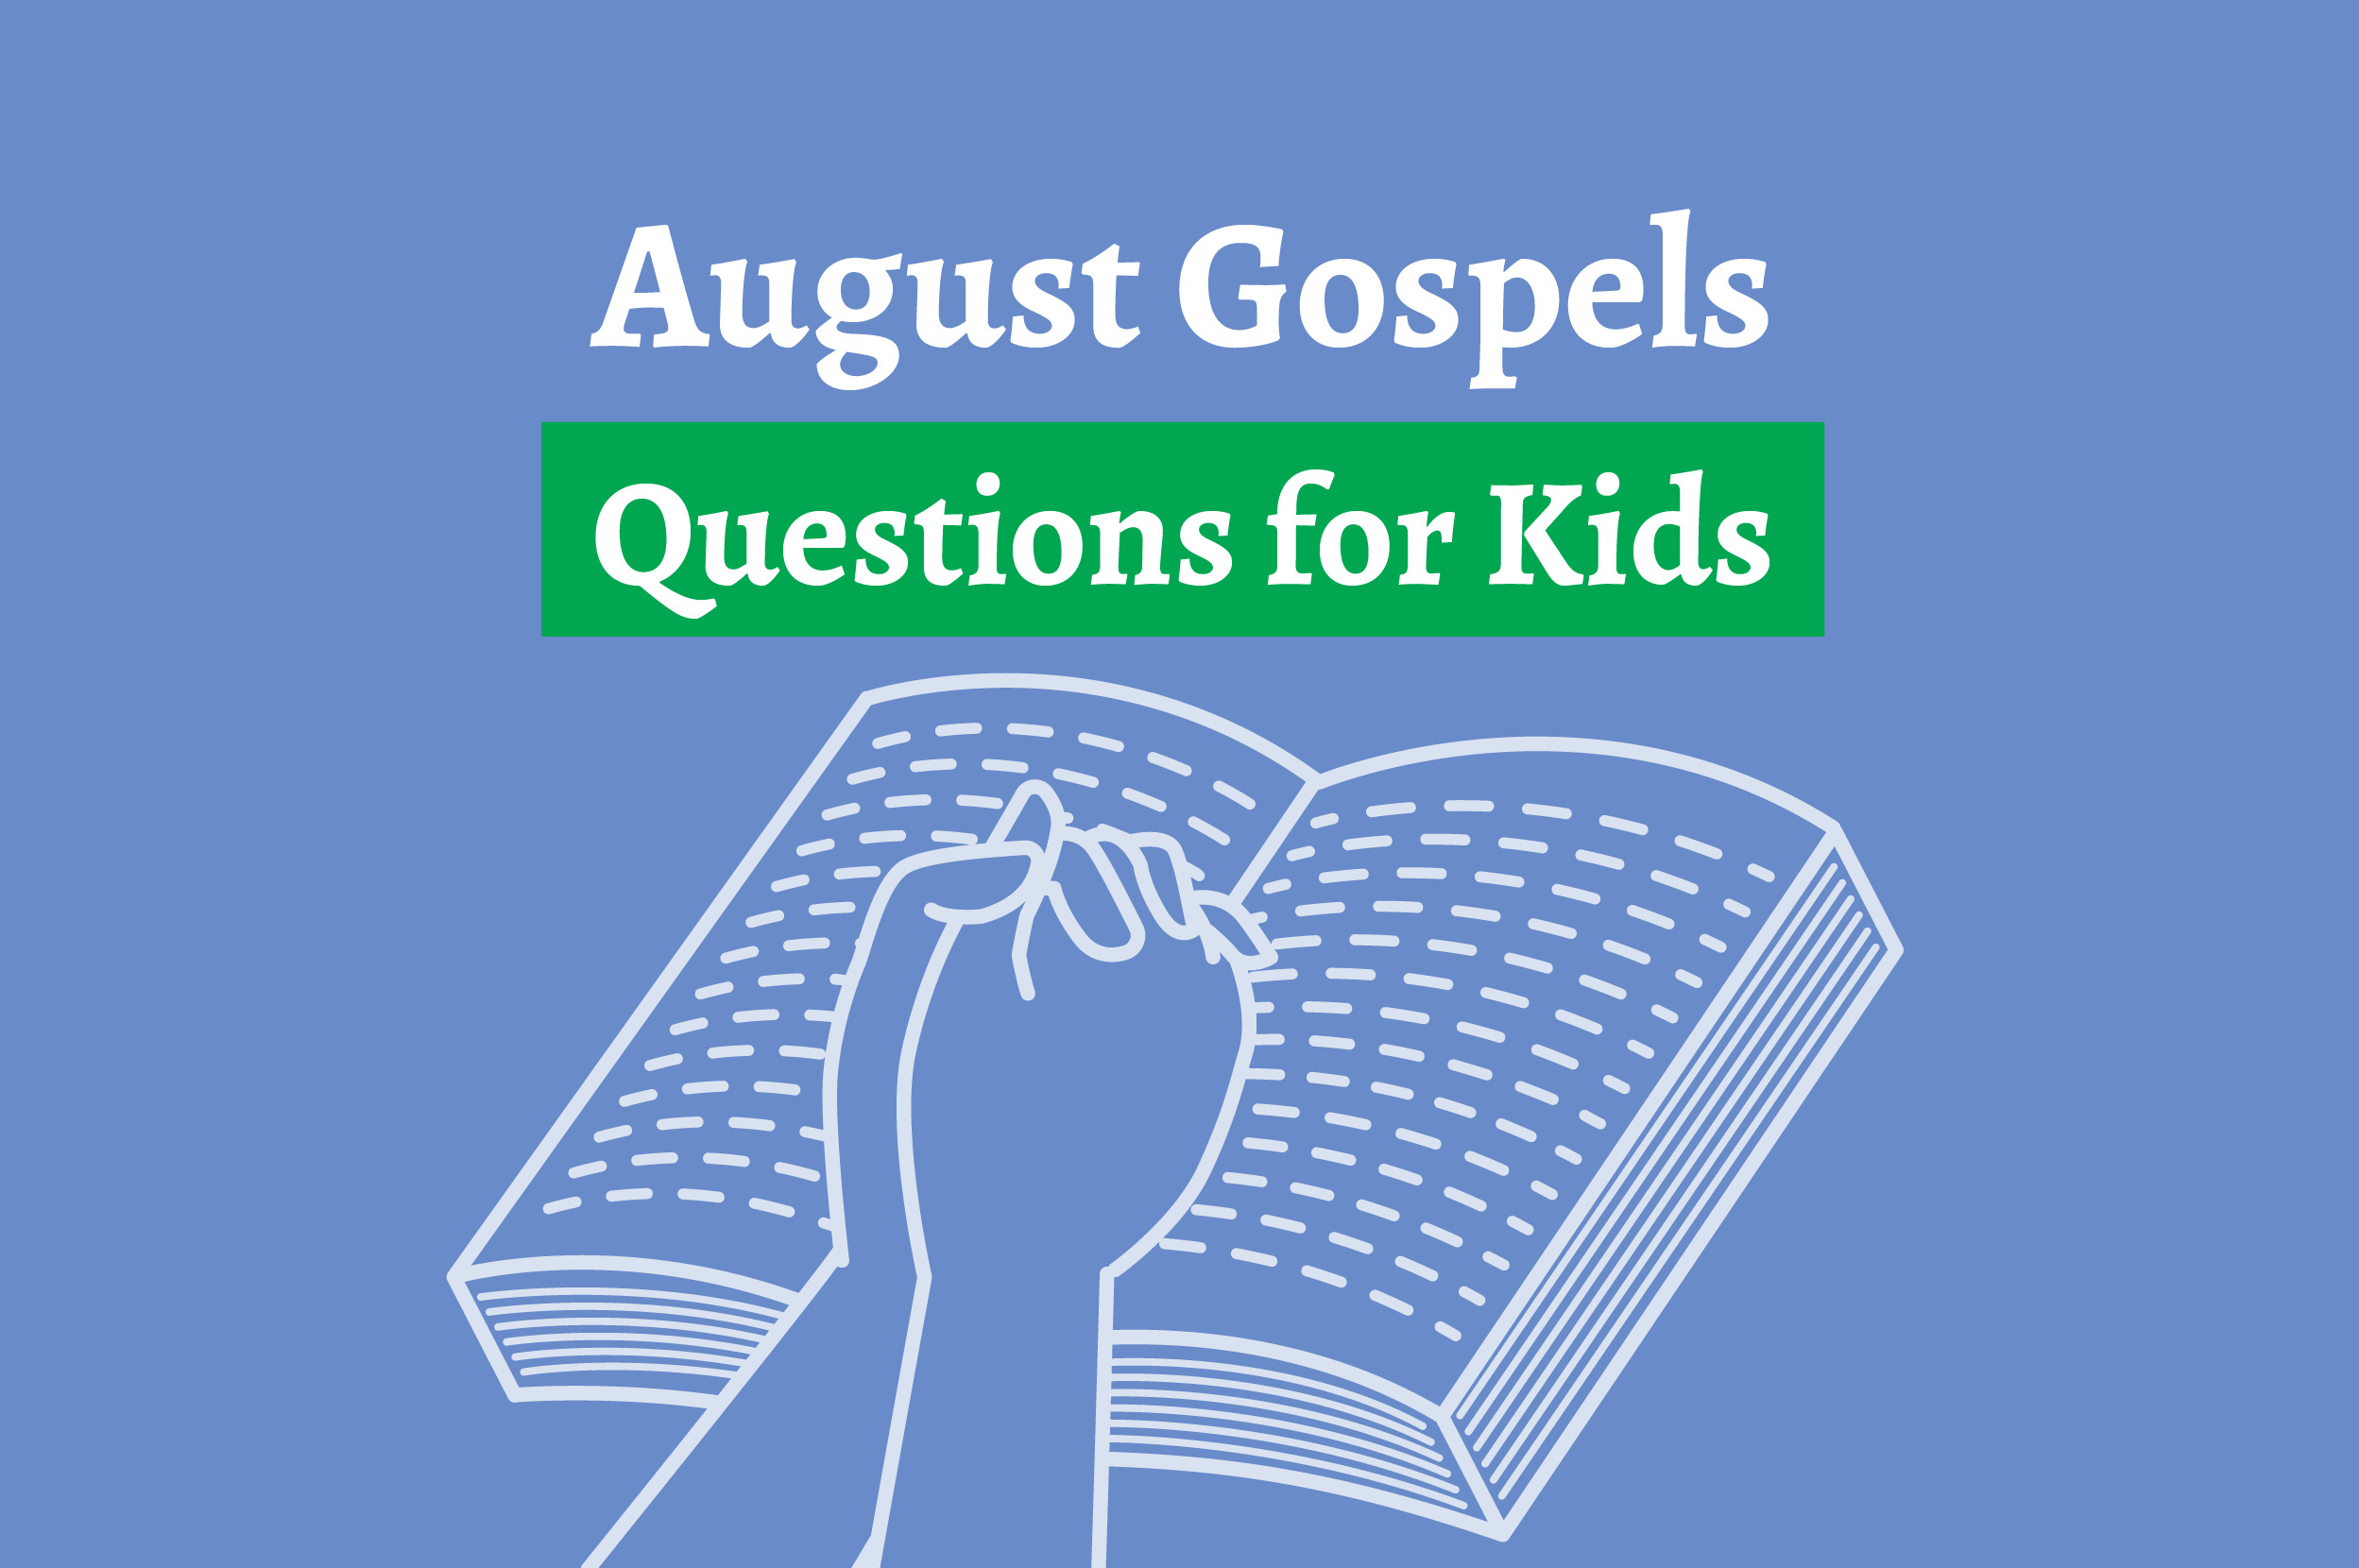 August Gospels: Questions to ask your kids